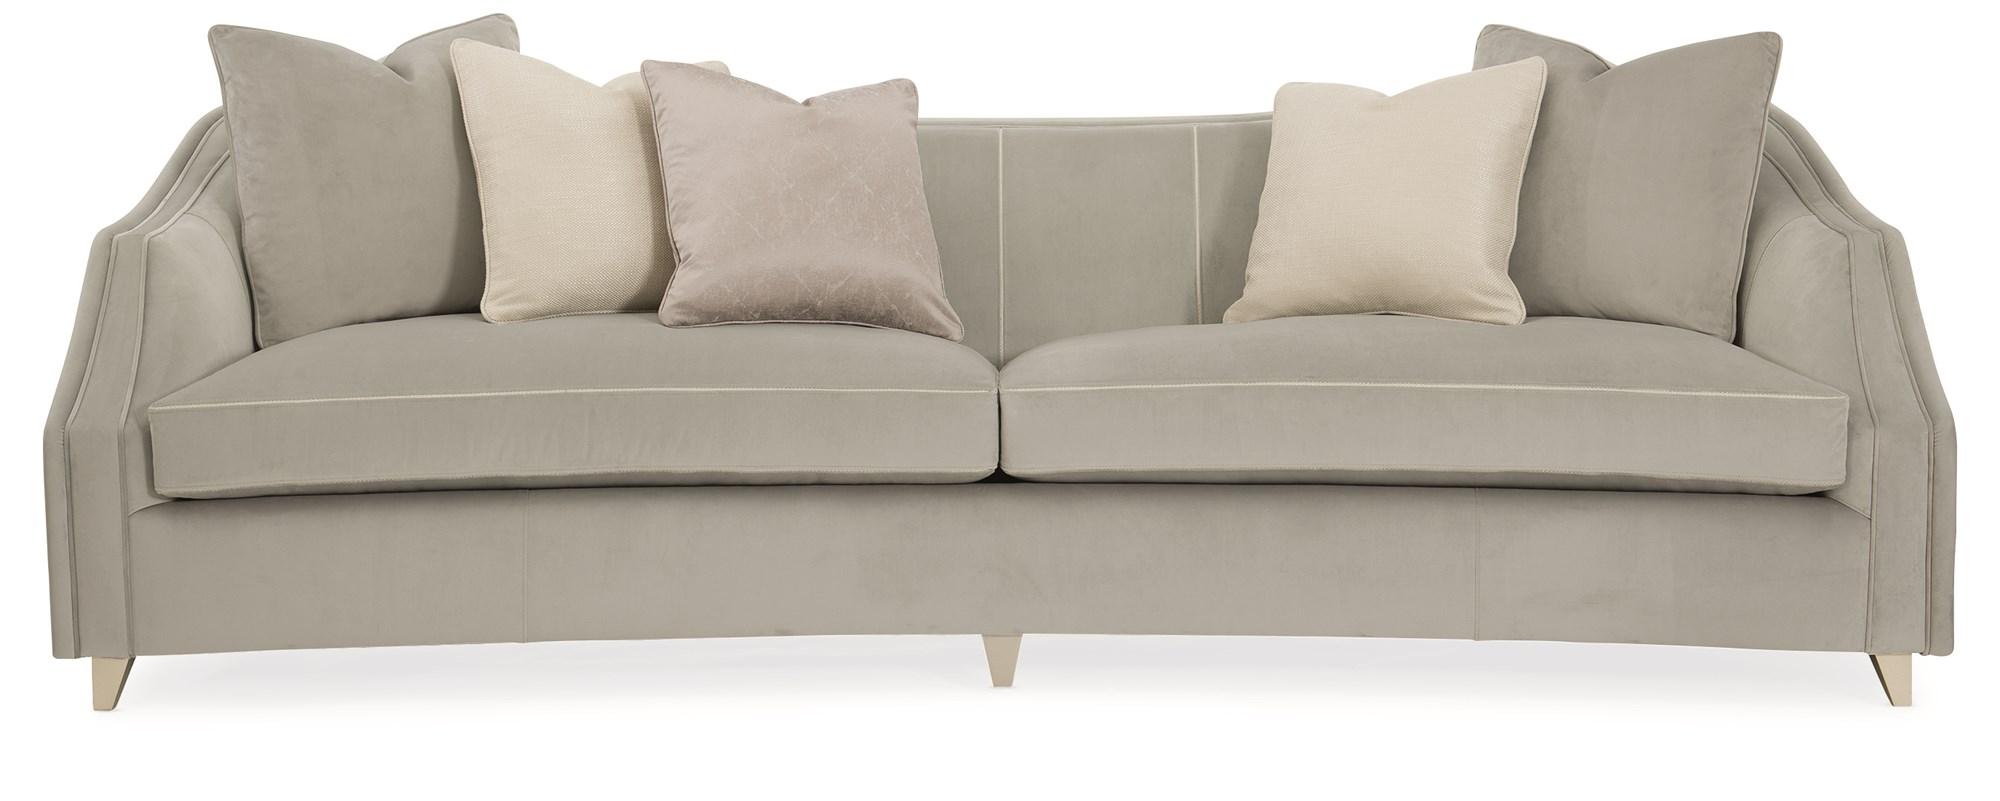 

    
Dove Grey Velvet Fabric & Taupe Paint Finish Sofa SEAMS TO ME by Caracole
